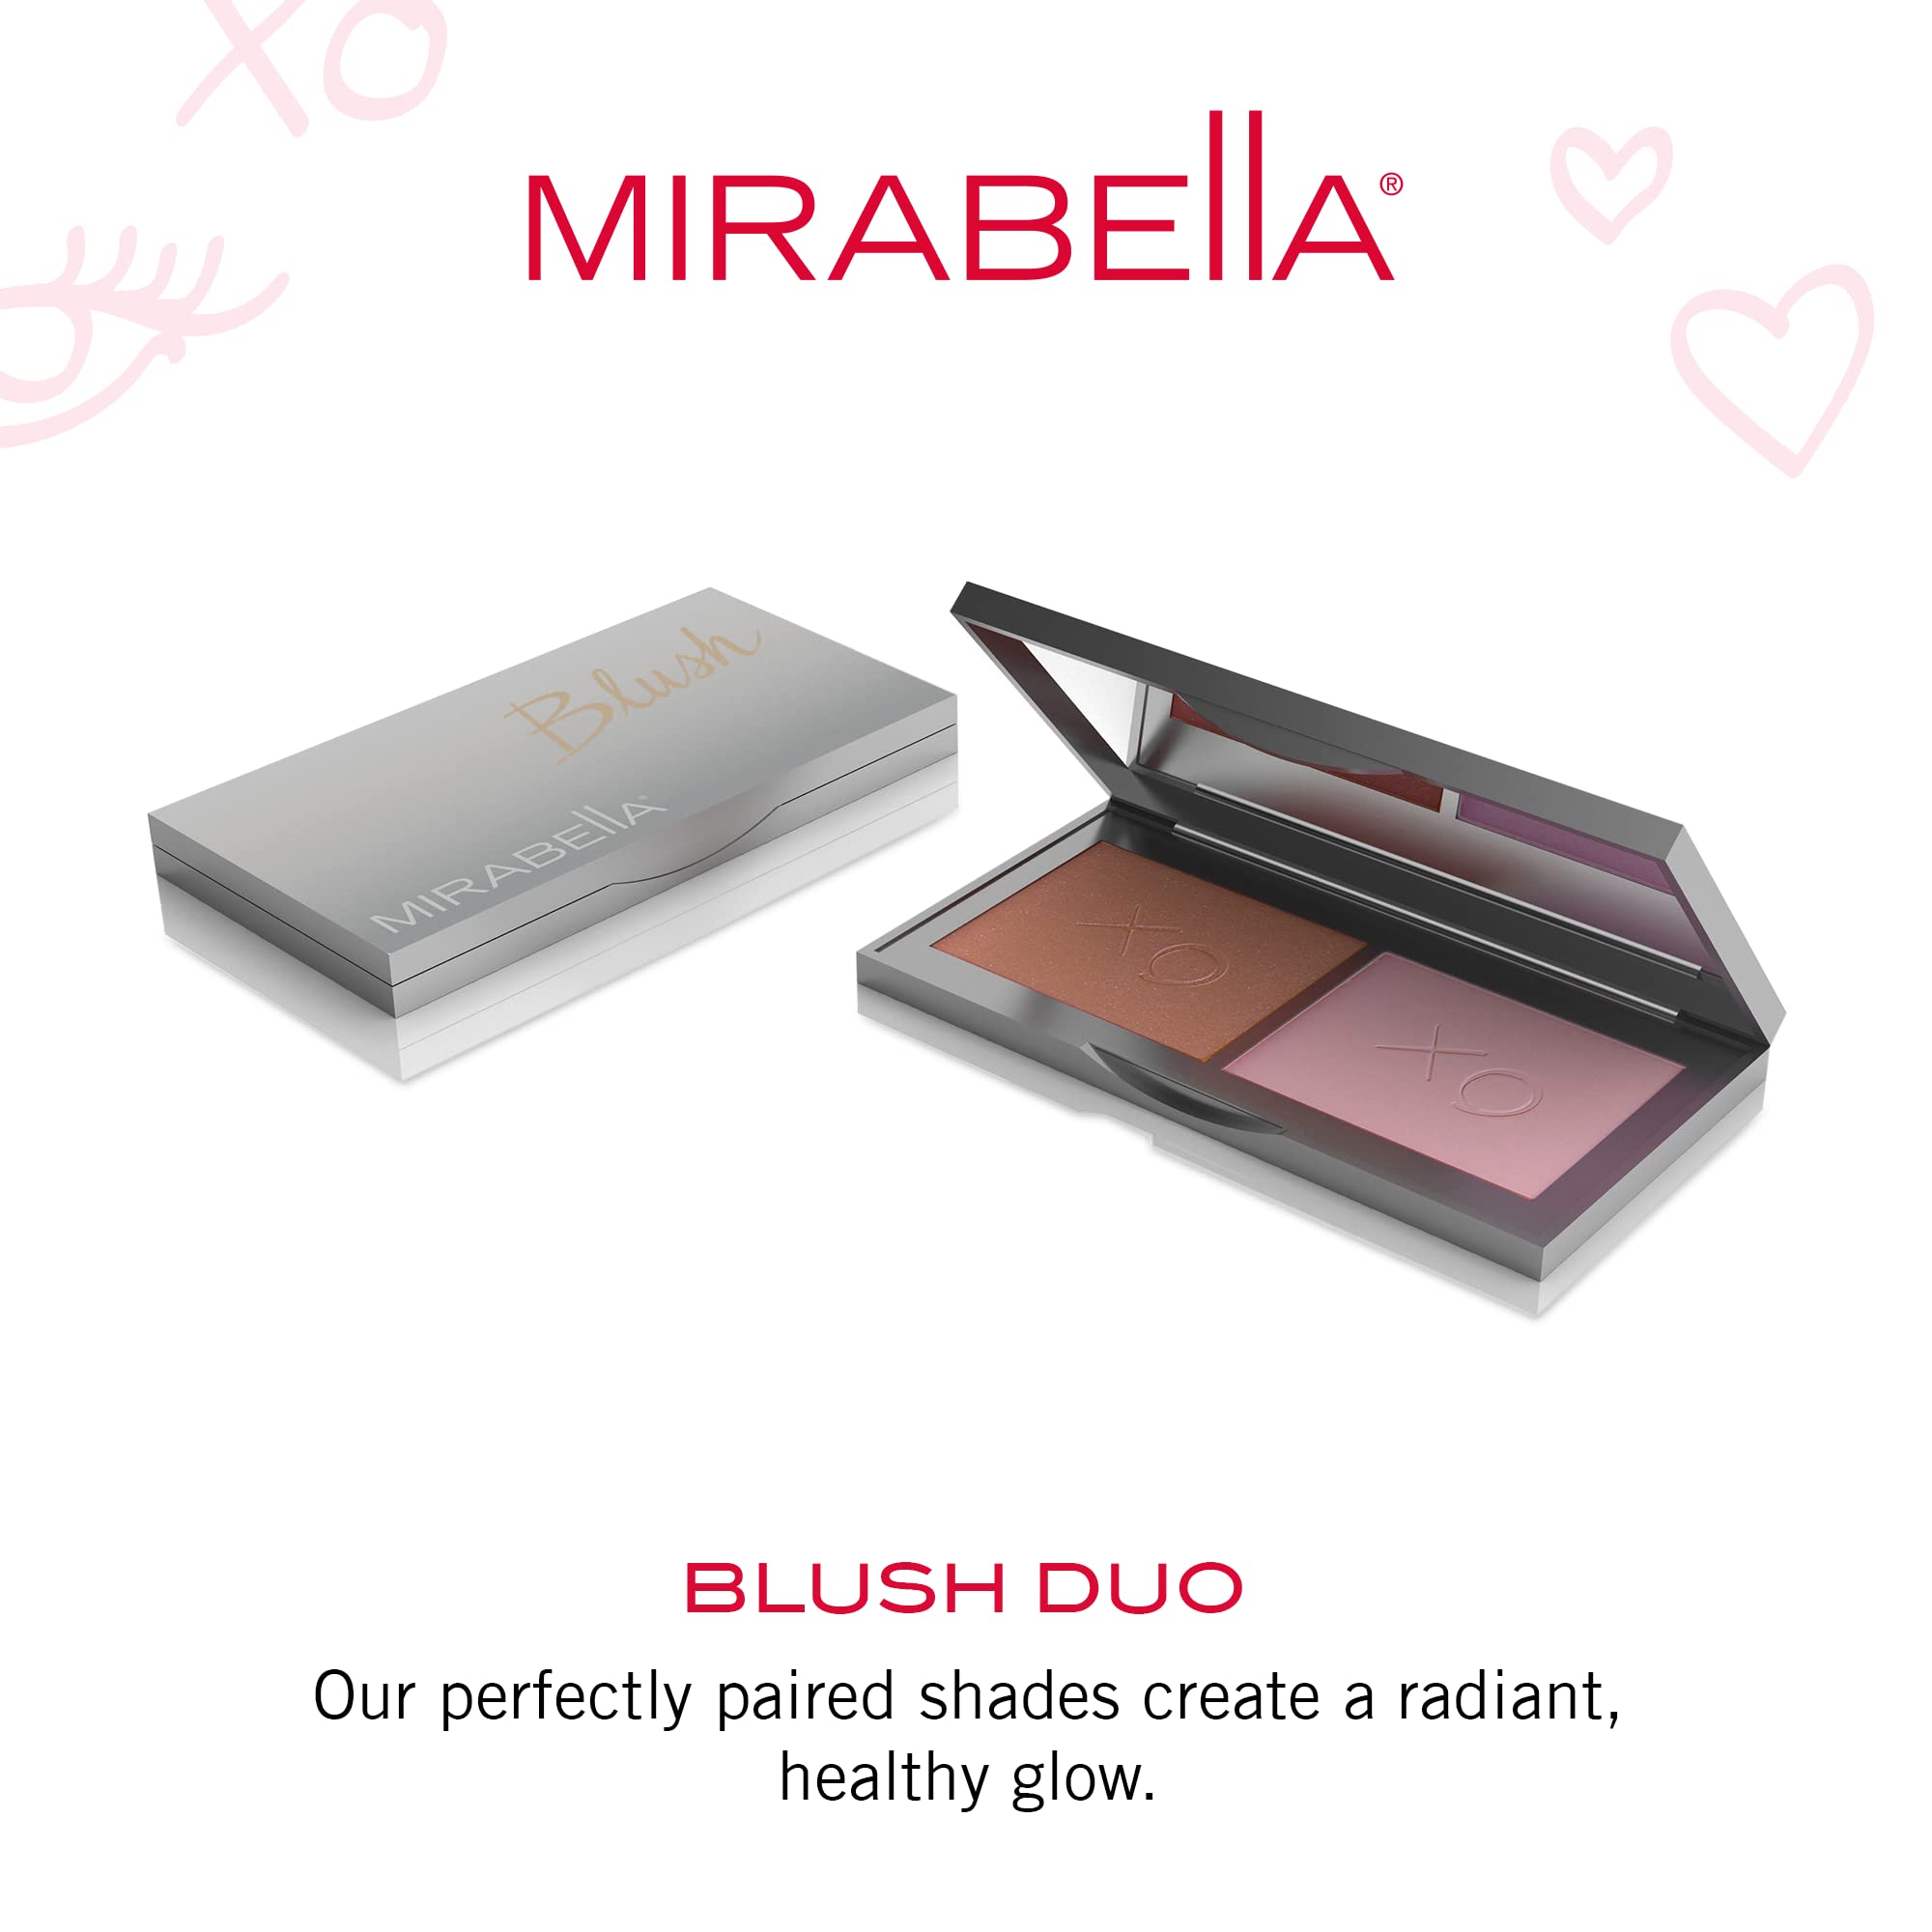 Mirabella Beauty Blush Duo, Beloved/Darling (Warm Red Brown / Matte Pink Mauve) - Mineral Pressed Powder for Cheeks - Professional, Compact & Easy-to-Apply Facial Makeup, Paraben & Talc-Free